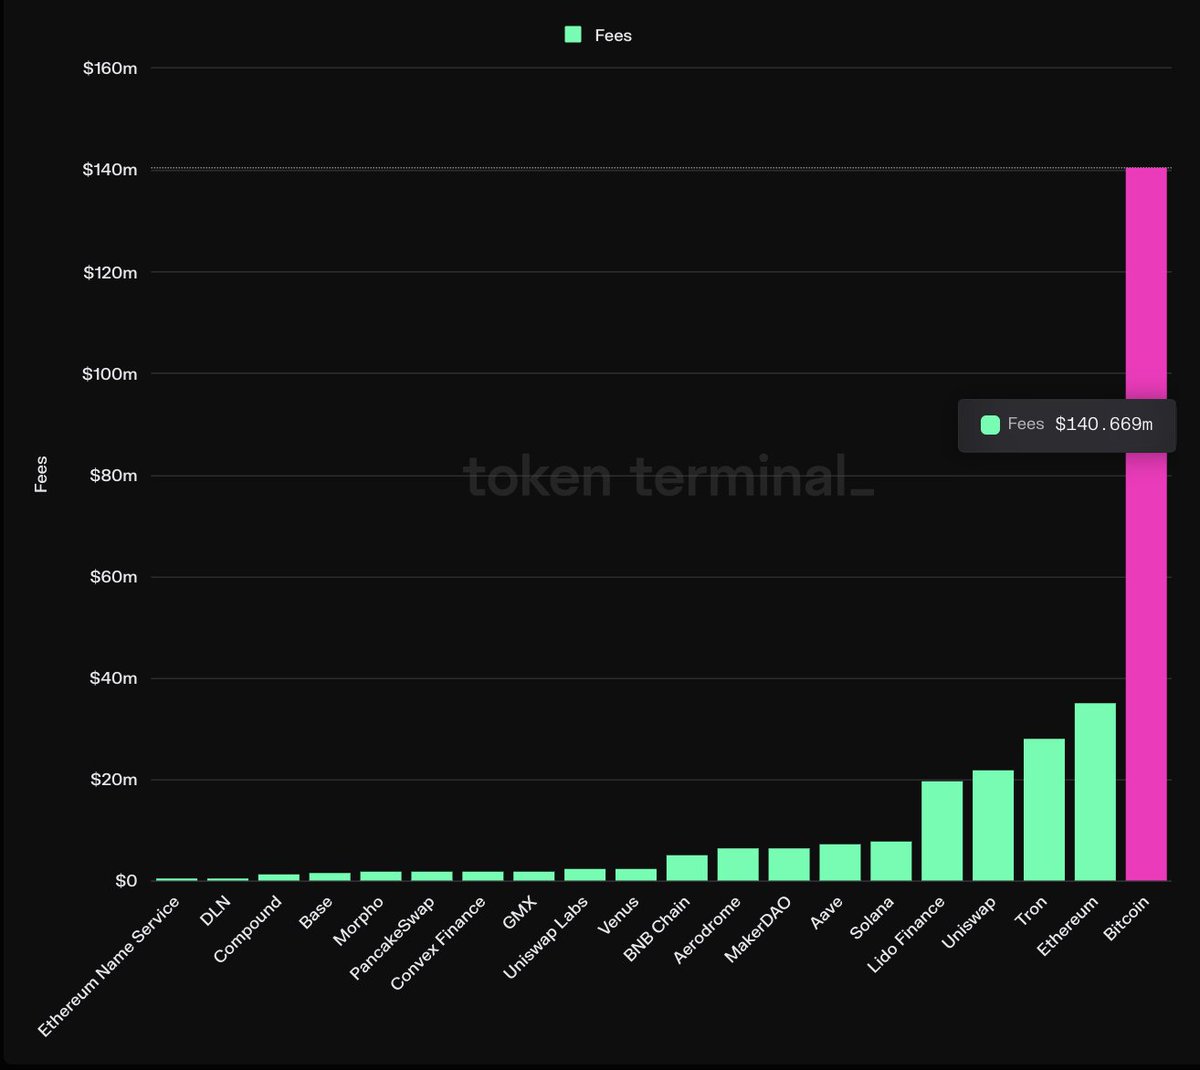 Following the halving and the surge in demand for blockspace, especially with the launch of the Runes Protocol, total weekly fees on Bitcoin have now surpassed $140M. This is by far the most in the entire ecosystem and catapulted Bitcoin to the second most total fees earned